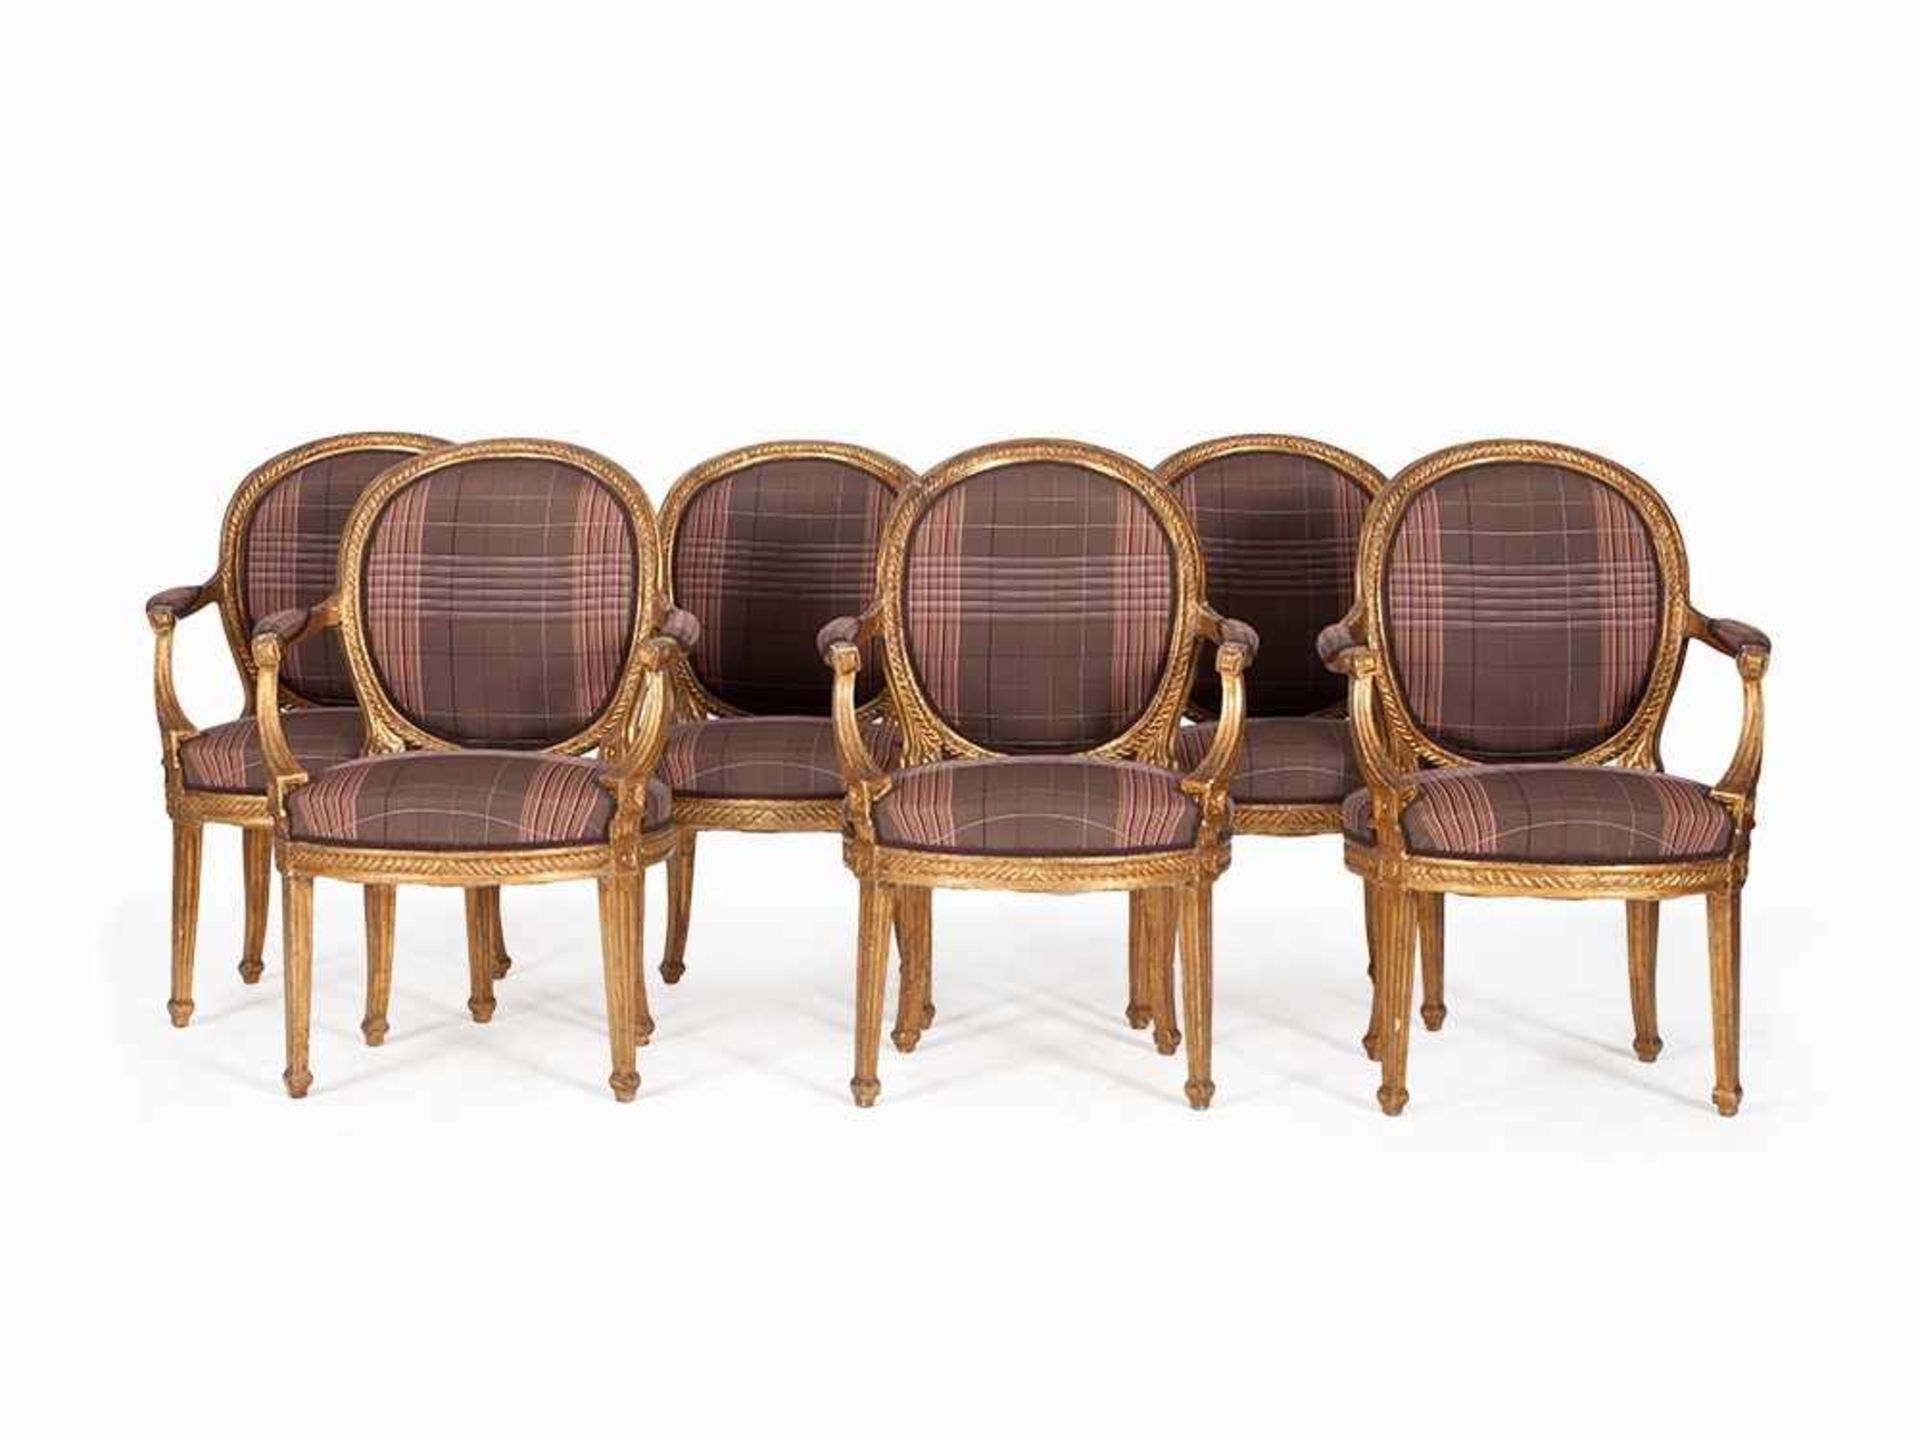 Set of Six Fauteuils, Lucca, around 1780 Solid wood, carved, chalk primed and gold-plated, checkered